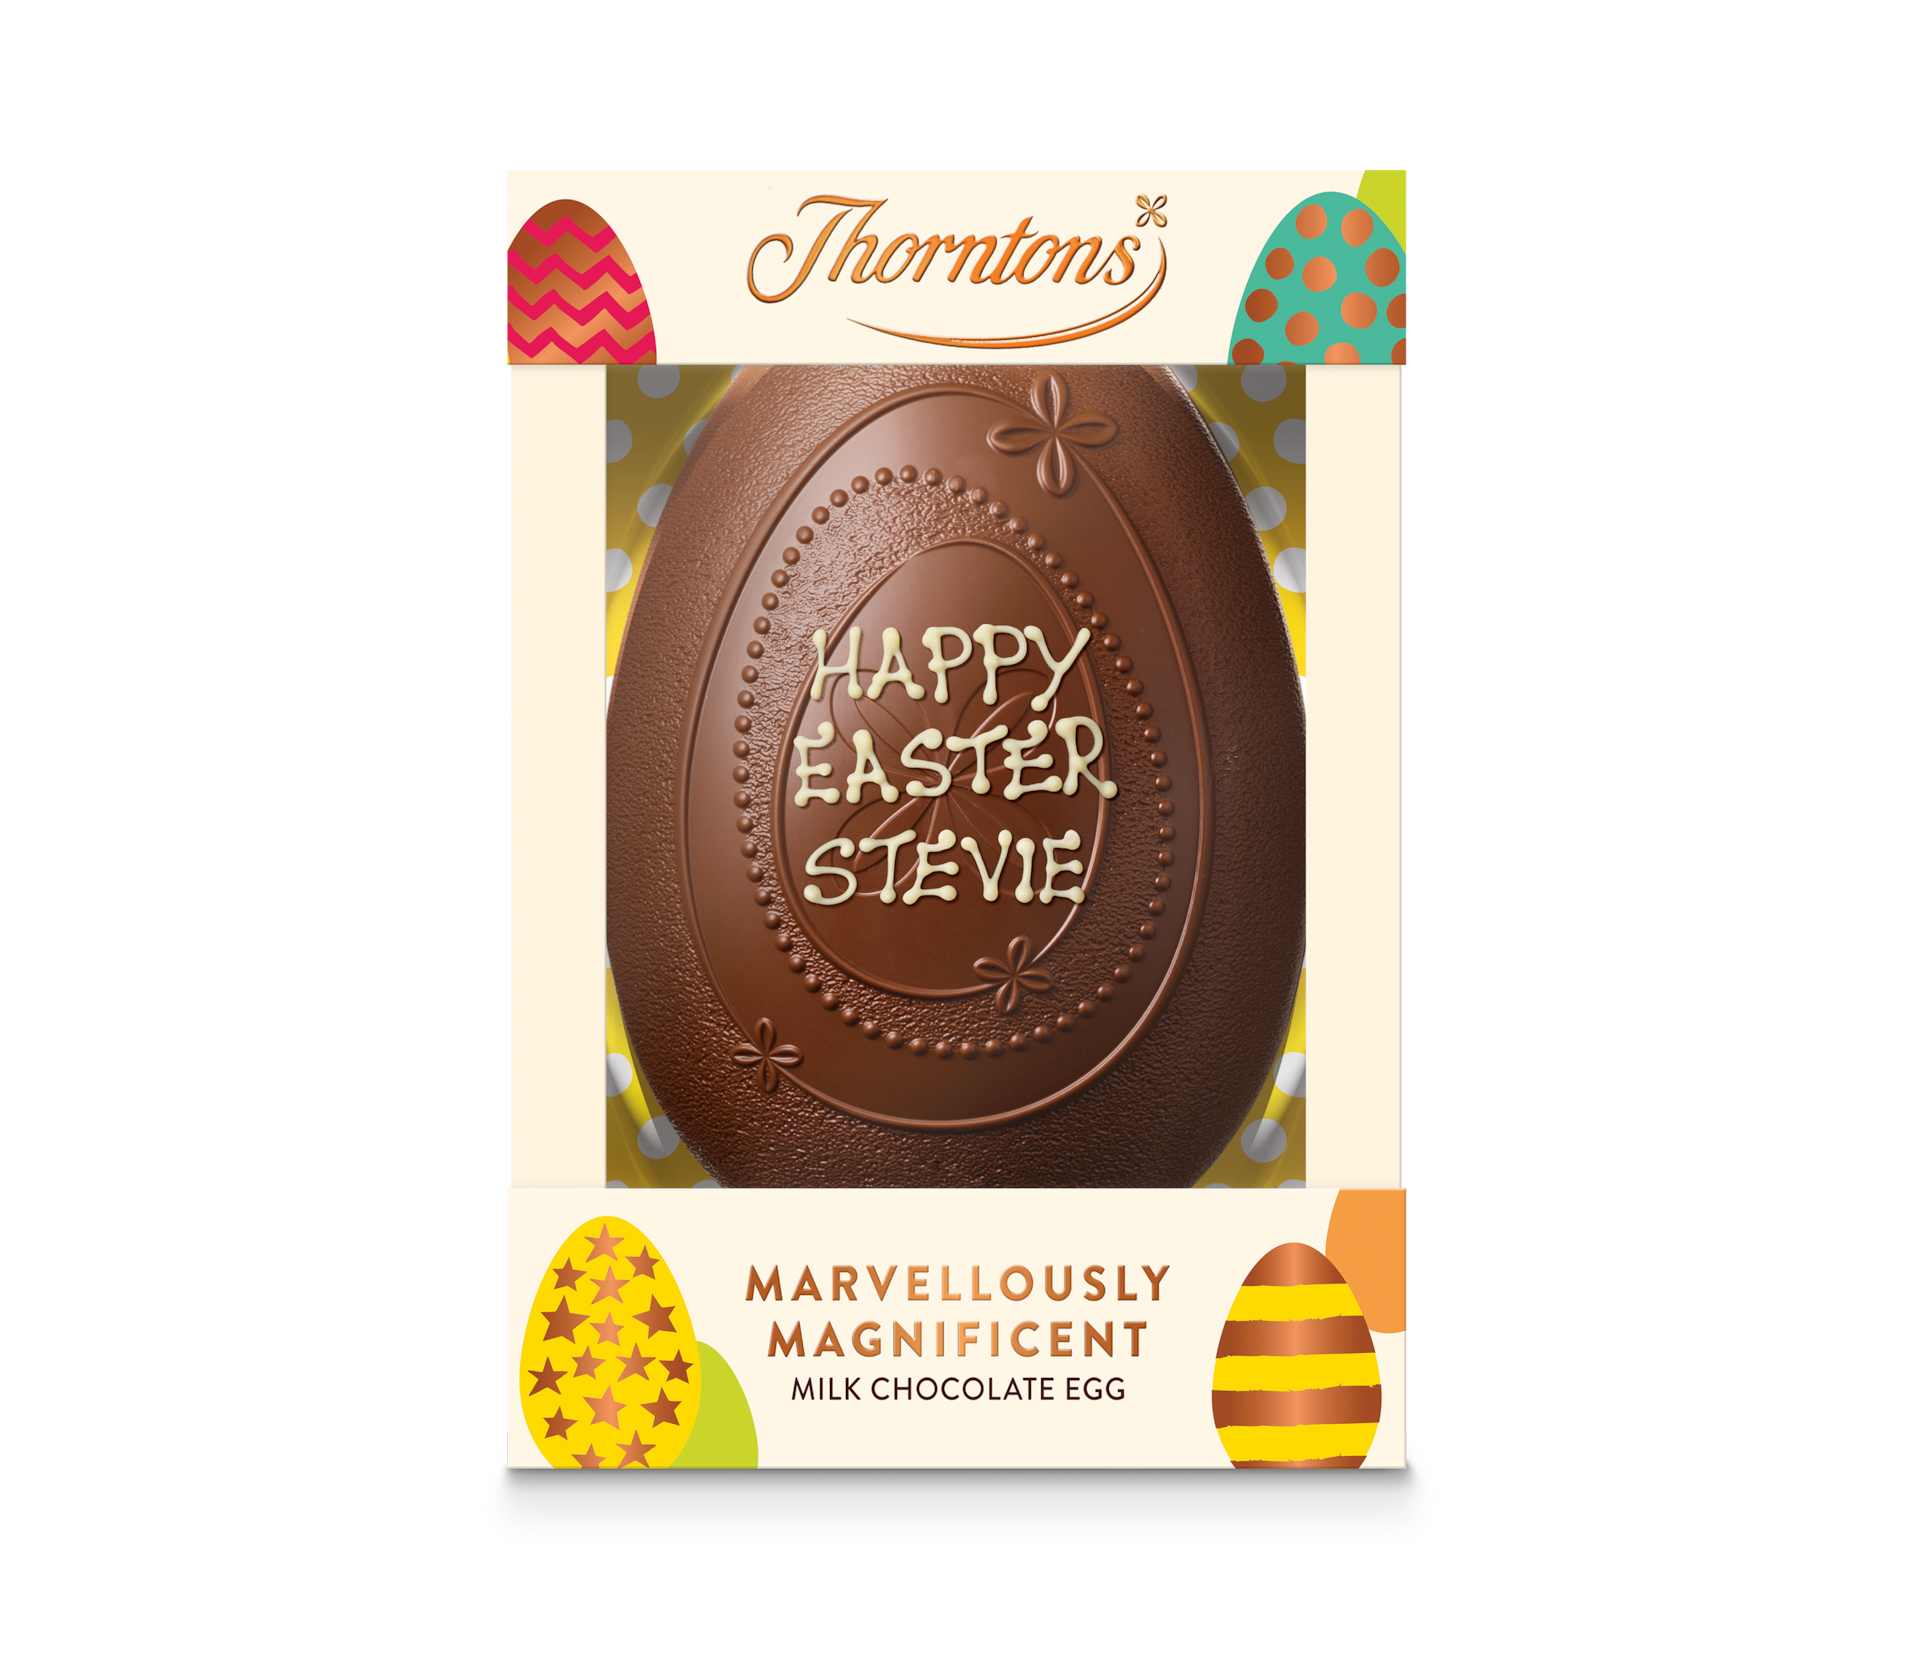 https://www.thorntons.com/medias/sys_master/images/h1a/h8c/8920351080478/77195911_main/77195911-main.png?resize=ProductGridComponent